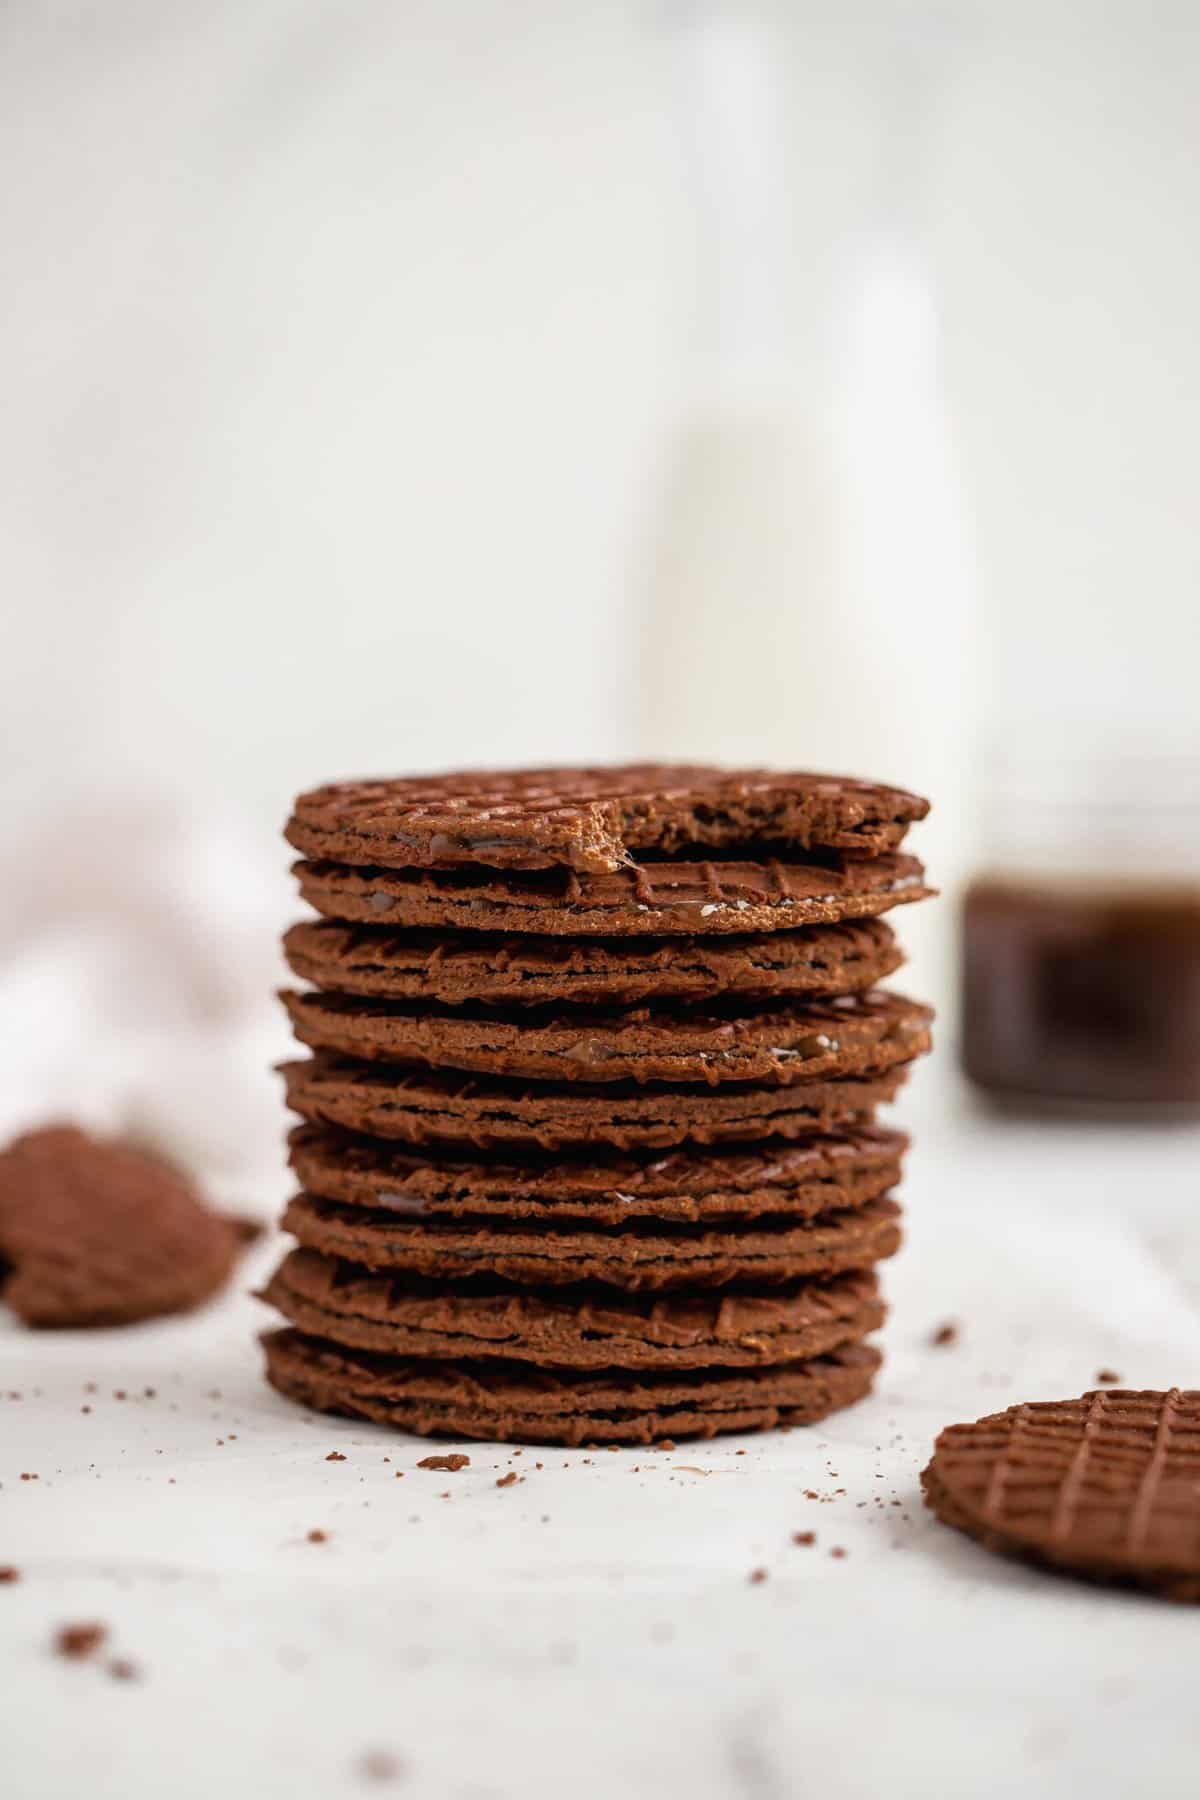 A stack of chocolate stroopwafels.